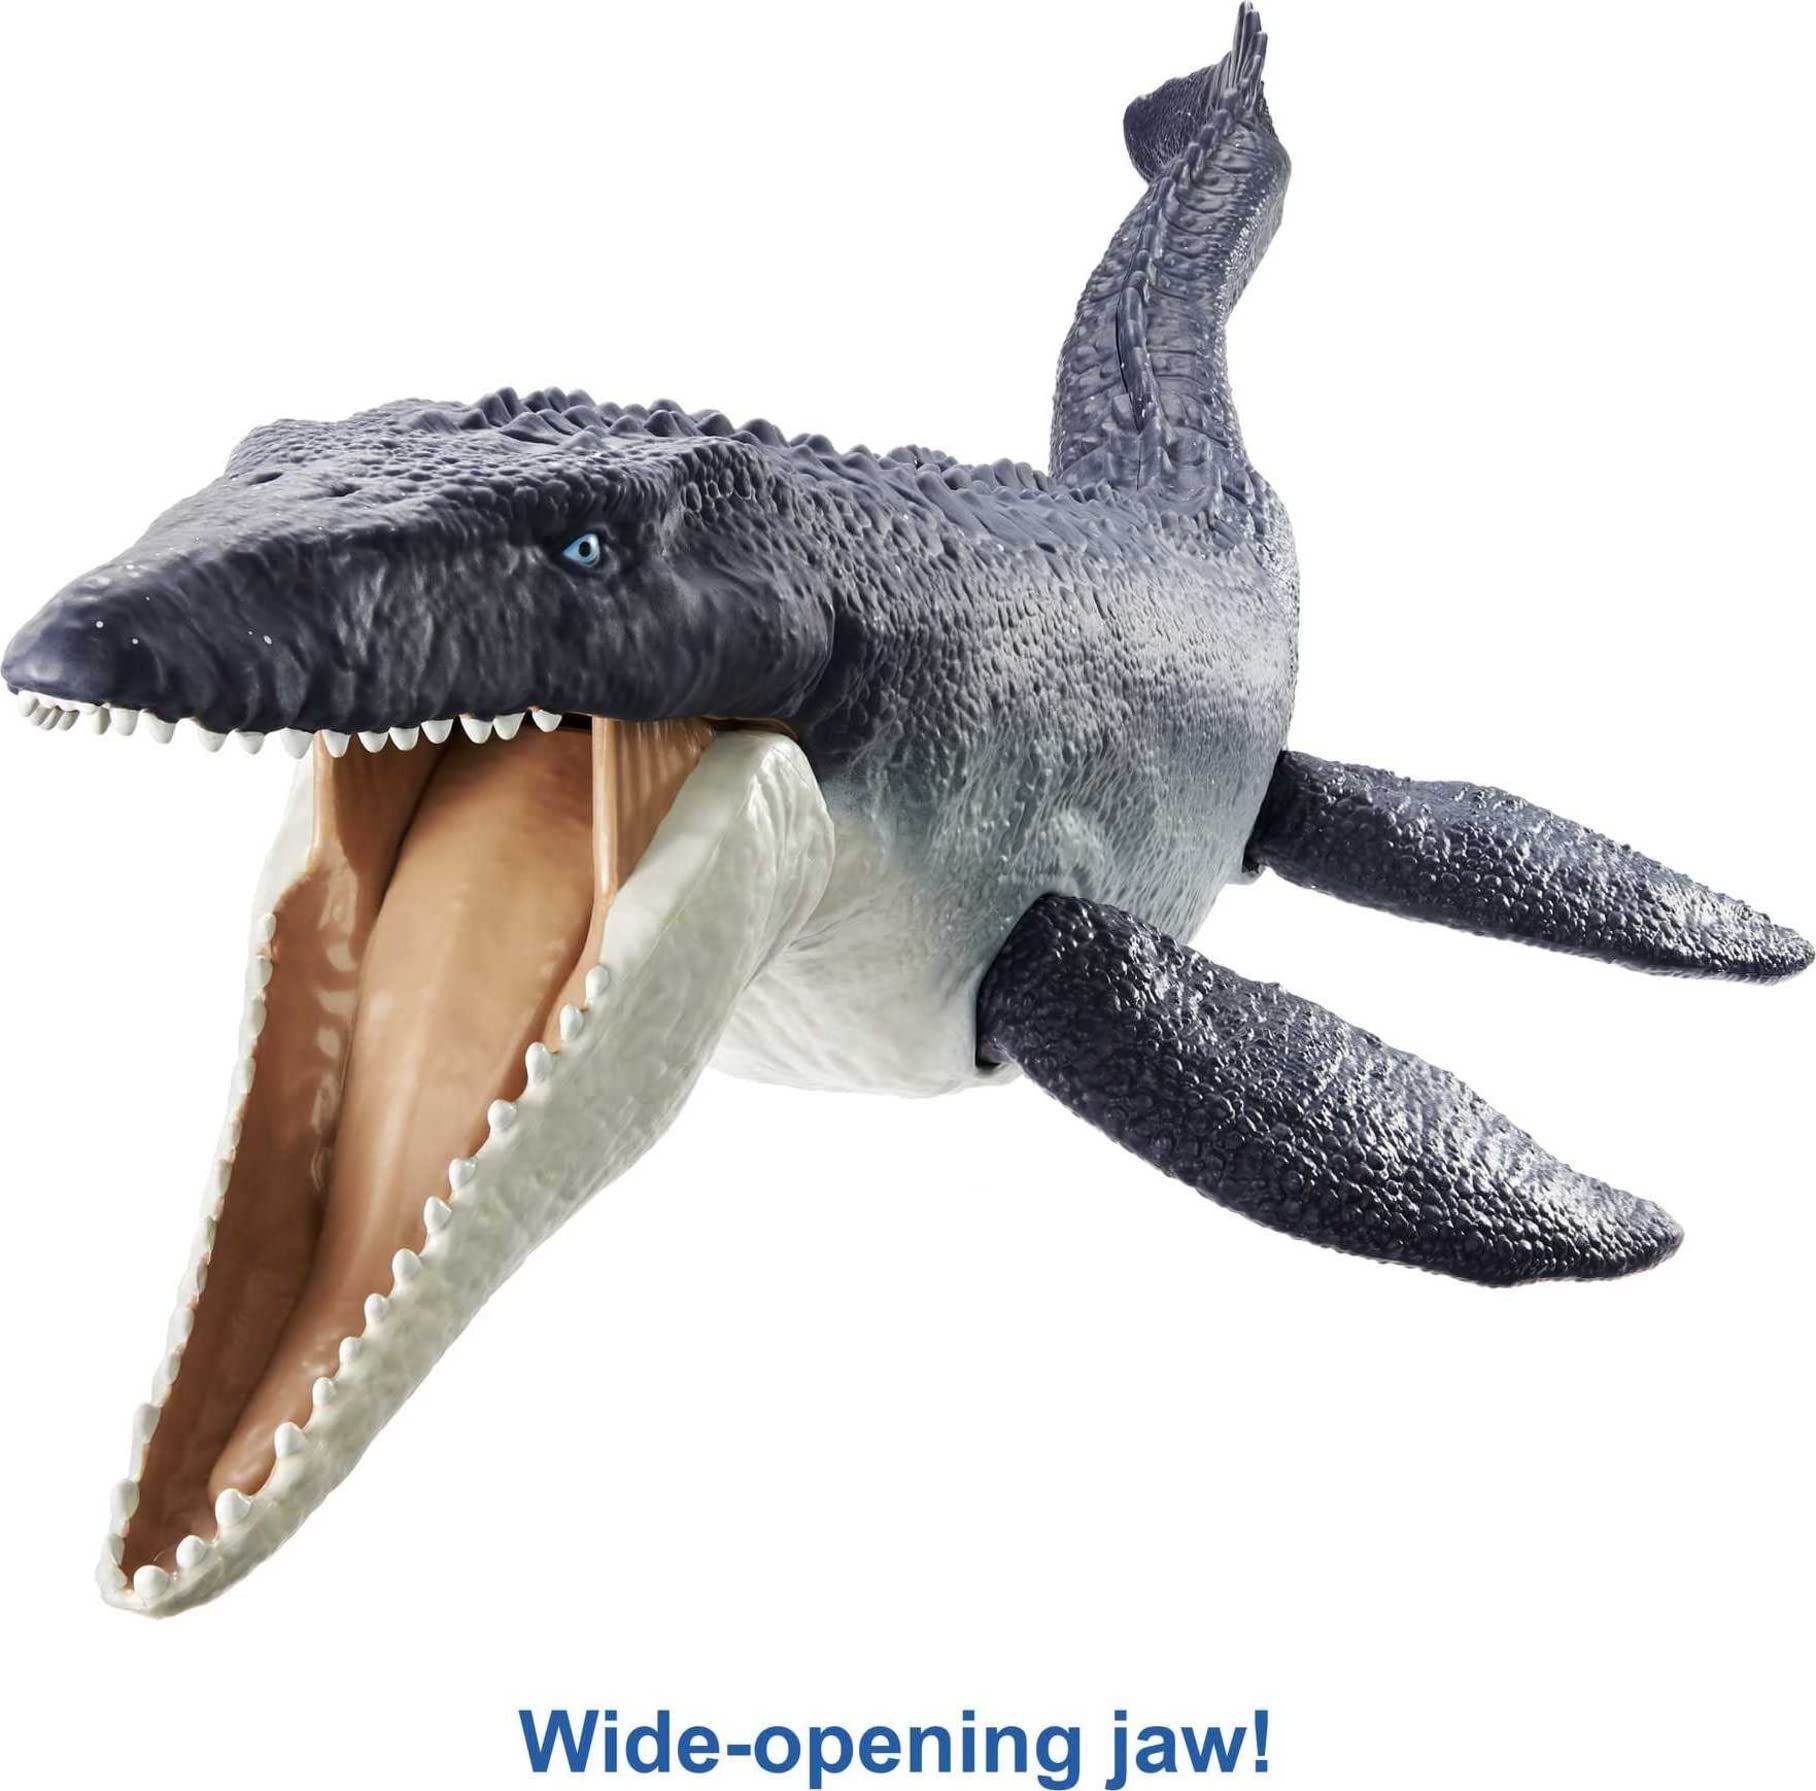 Jurassic World Toys Dominion Mosasaurus Dinosaur Action Figure, 29-in Long Toy with Movable JointsPlus Downloadable App & AR